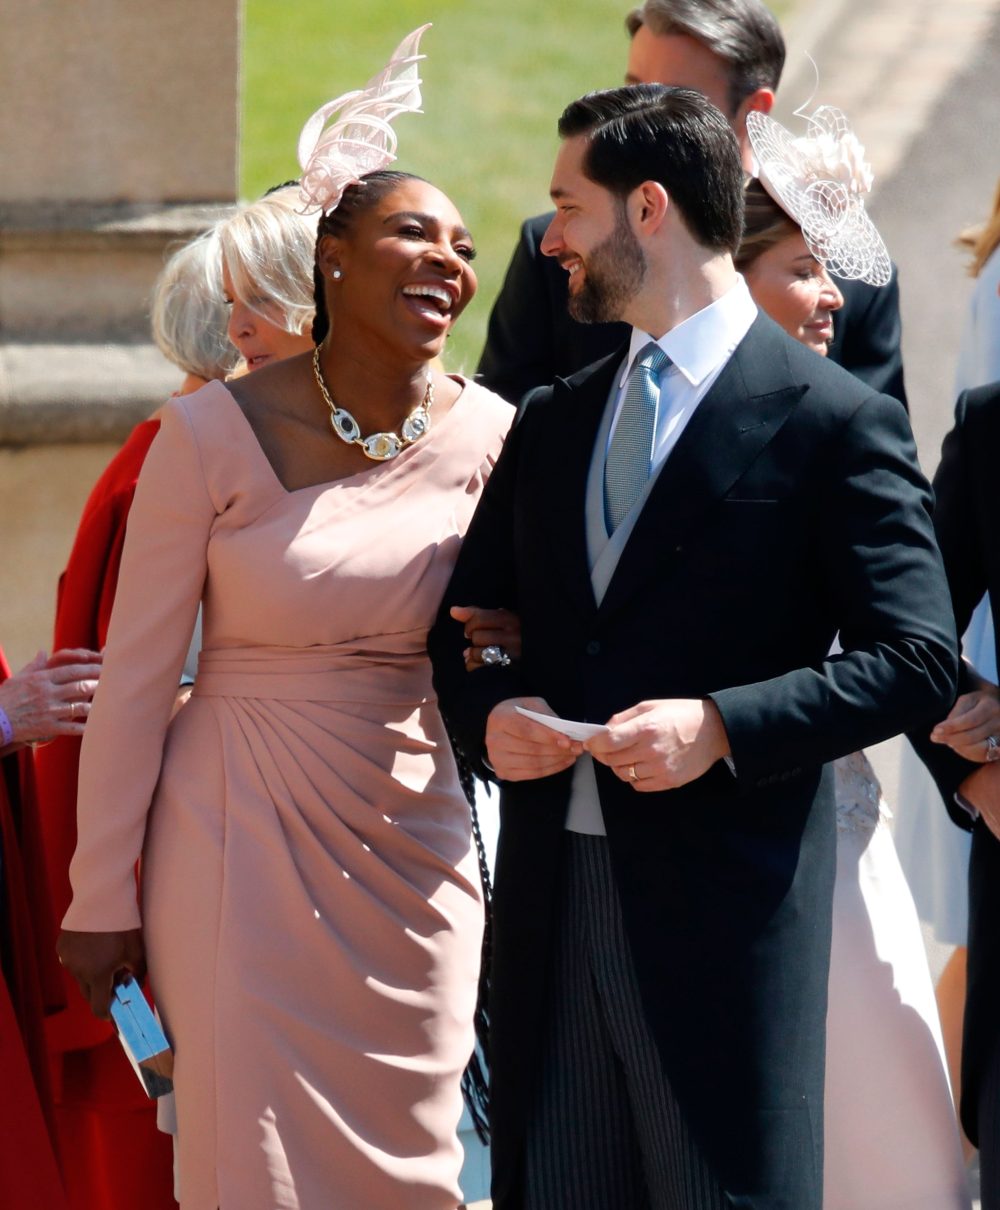 Serena Williams on How Alexis Ohanian Captured Her Heart: 'He Doesn't Try to Dim My Light'